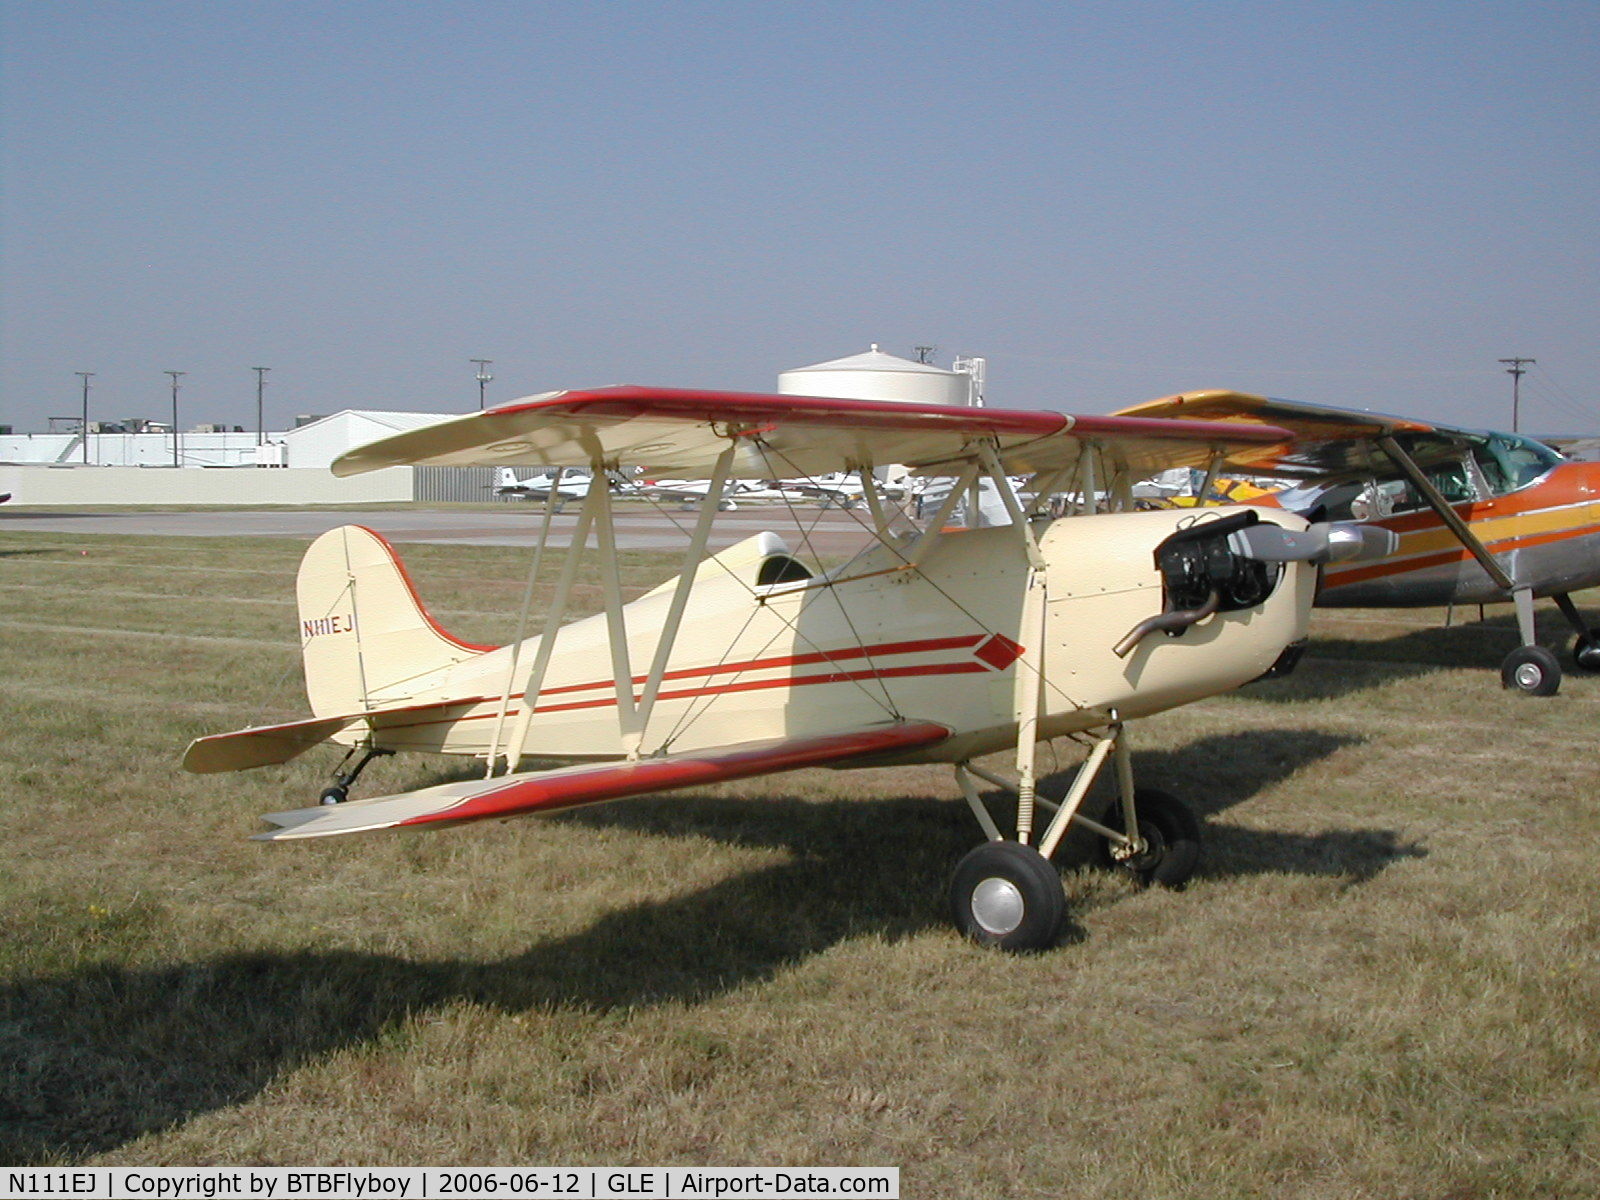 N111EJ, 1993 Jankow Edward W GYPSY ROSE C/N 001, photo taken at the Texas chapter AAA fly-in Gainesville, TX June 2006